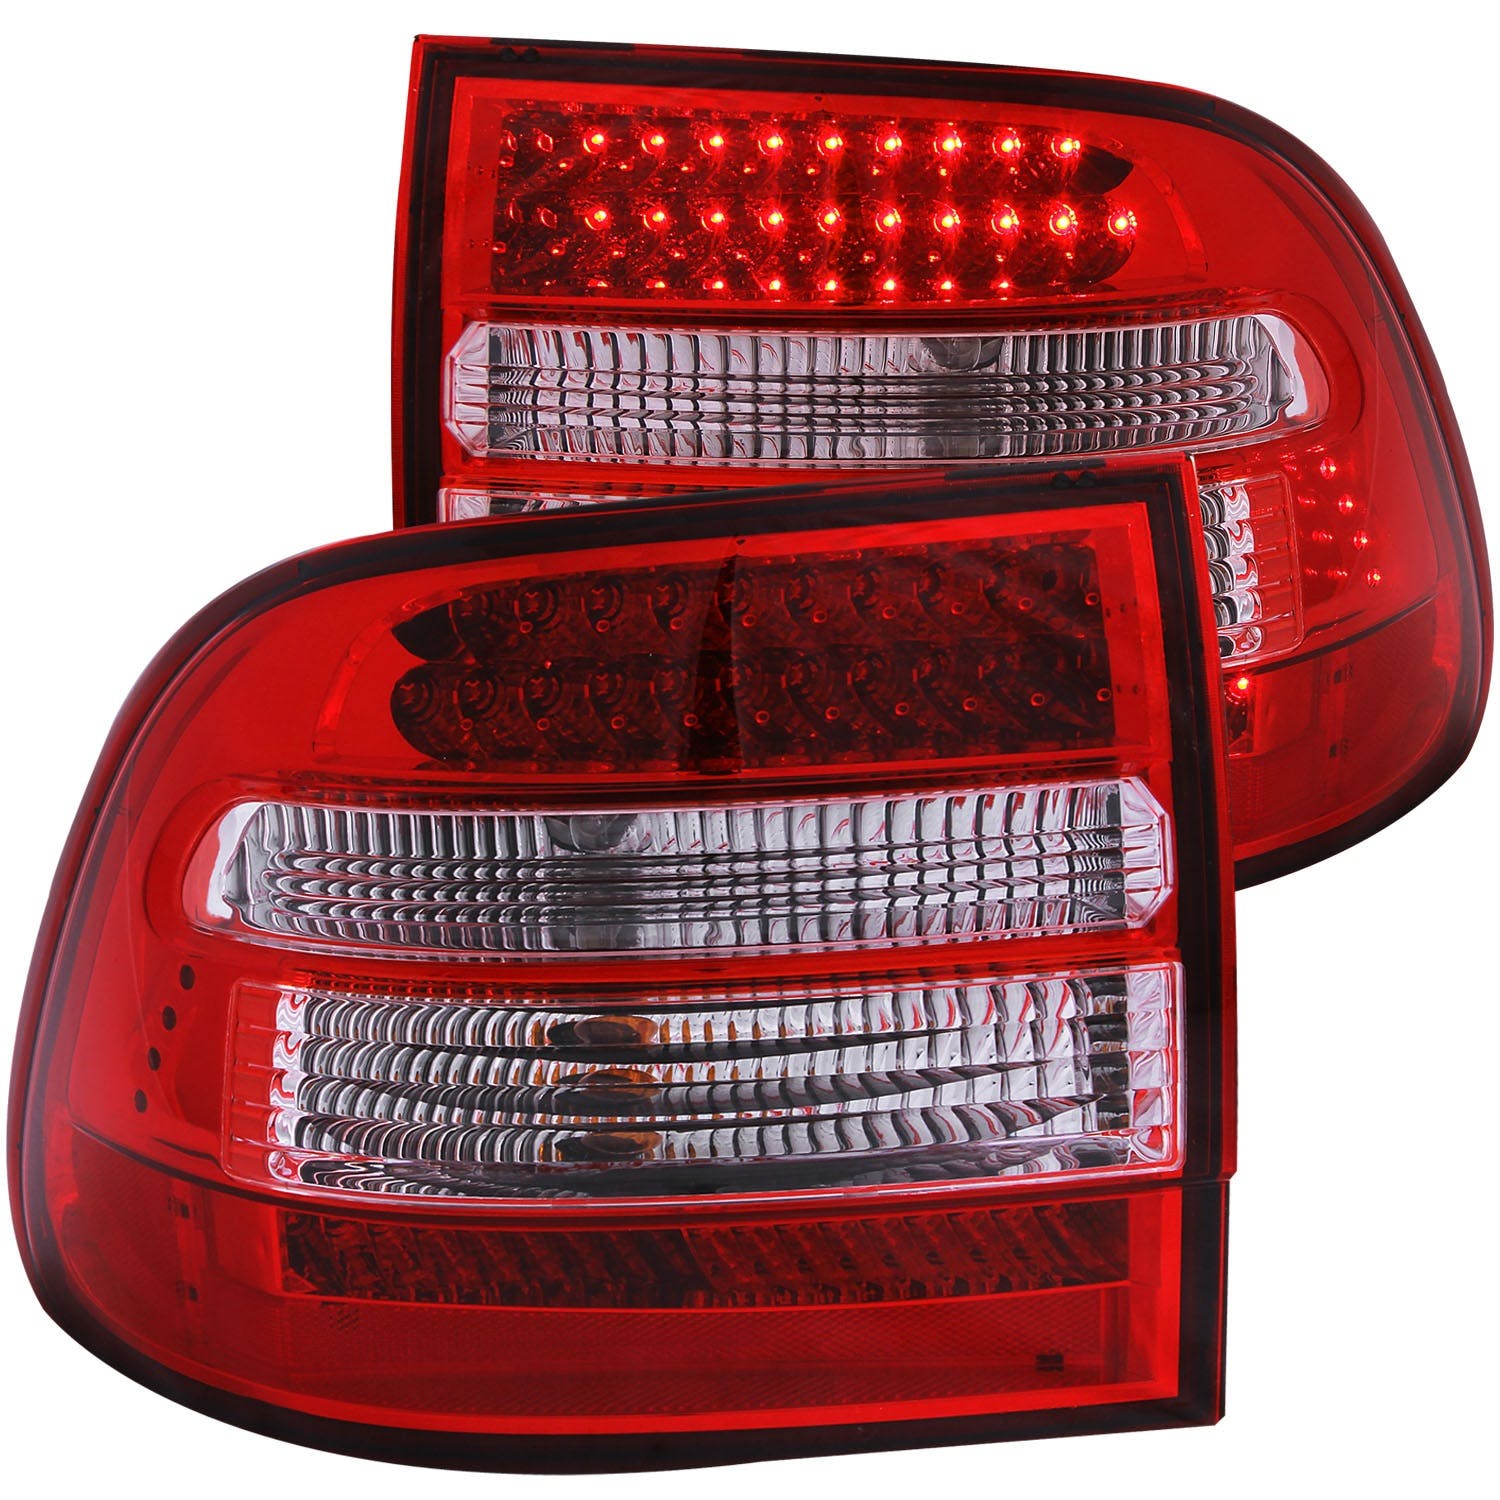 AnzoUSA 321170 LED Taillights Red/Clear